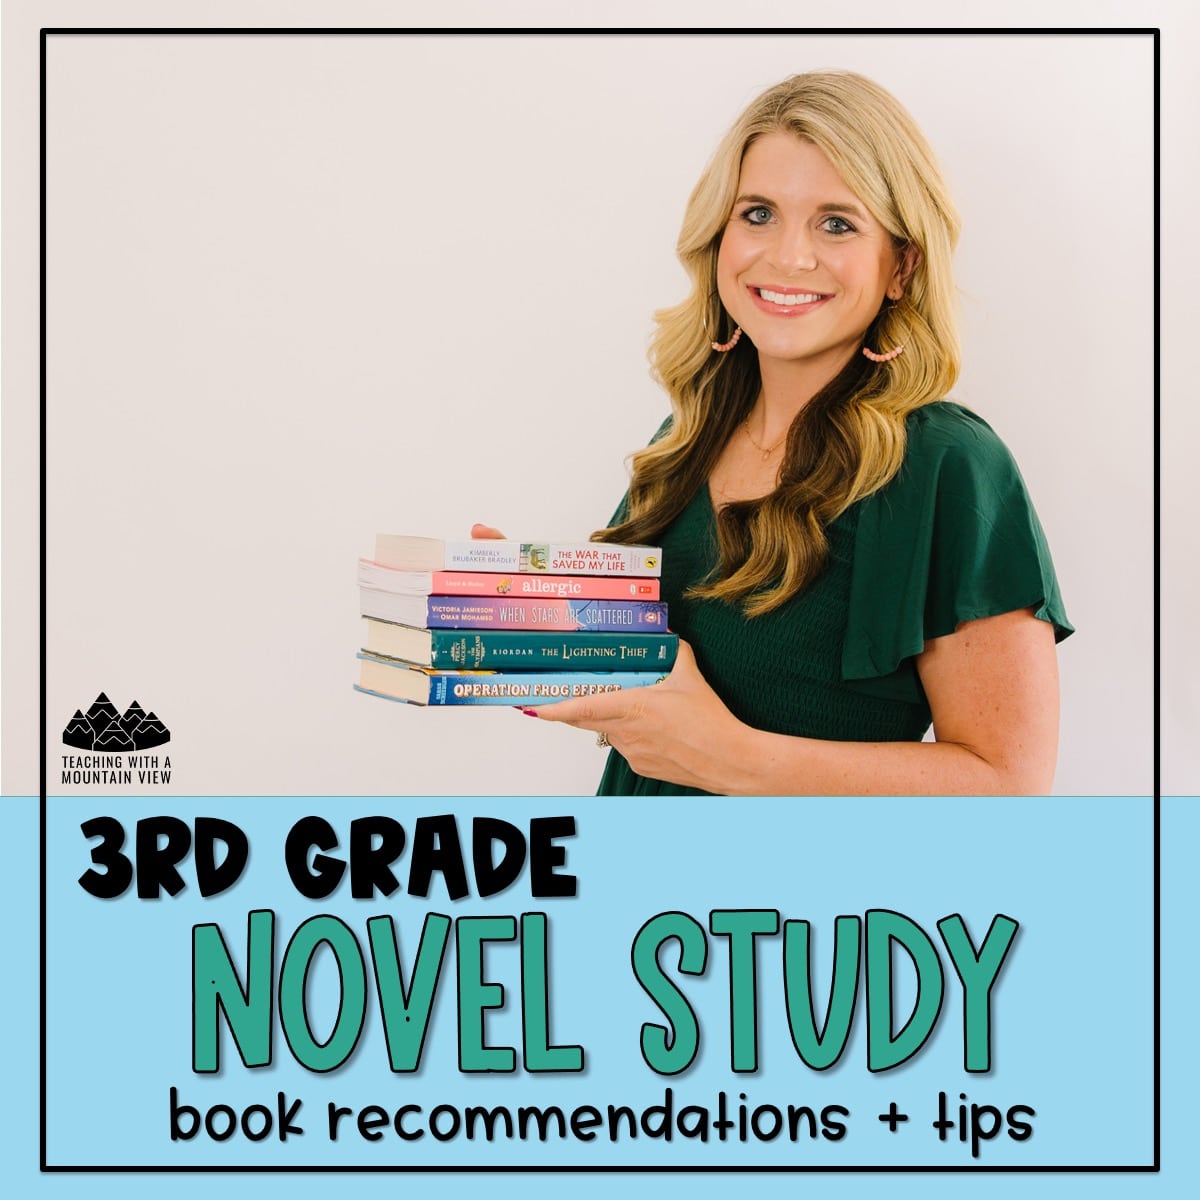 Make planning your next novel study easy with these 3rd grade novel study books! I've also included my favorite accountability tips!